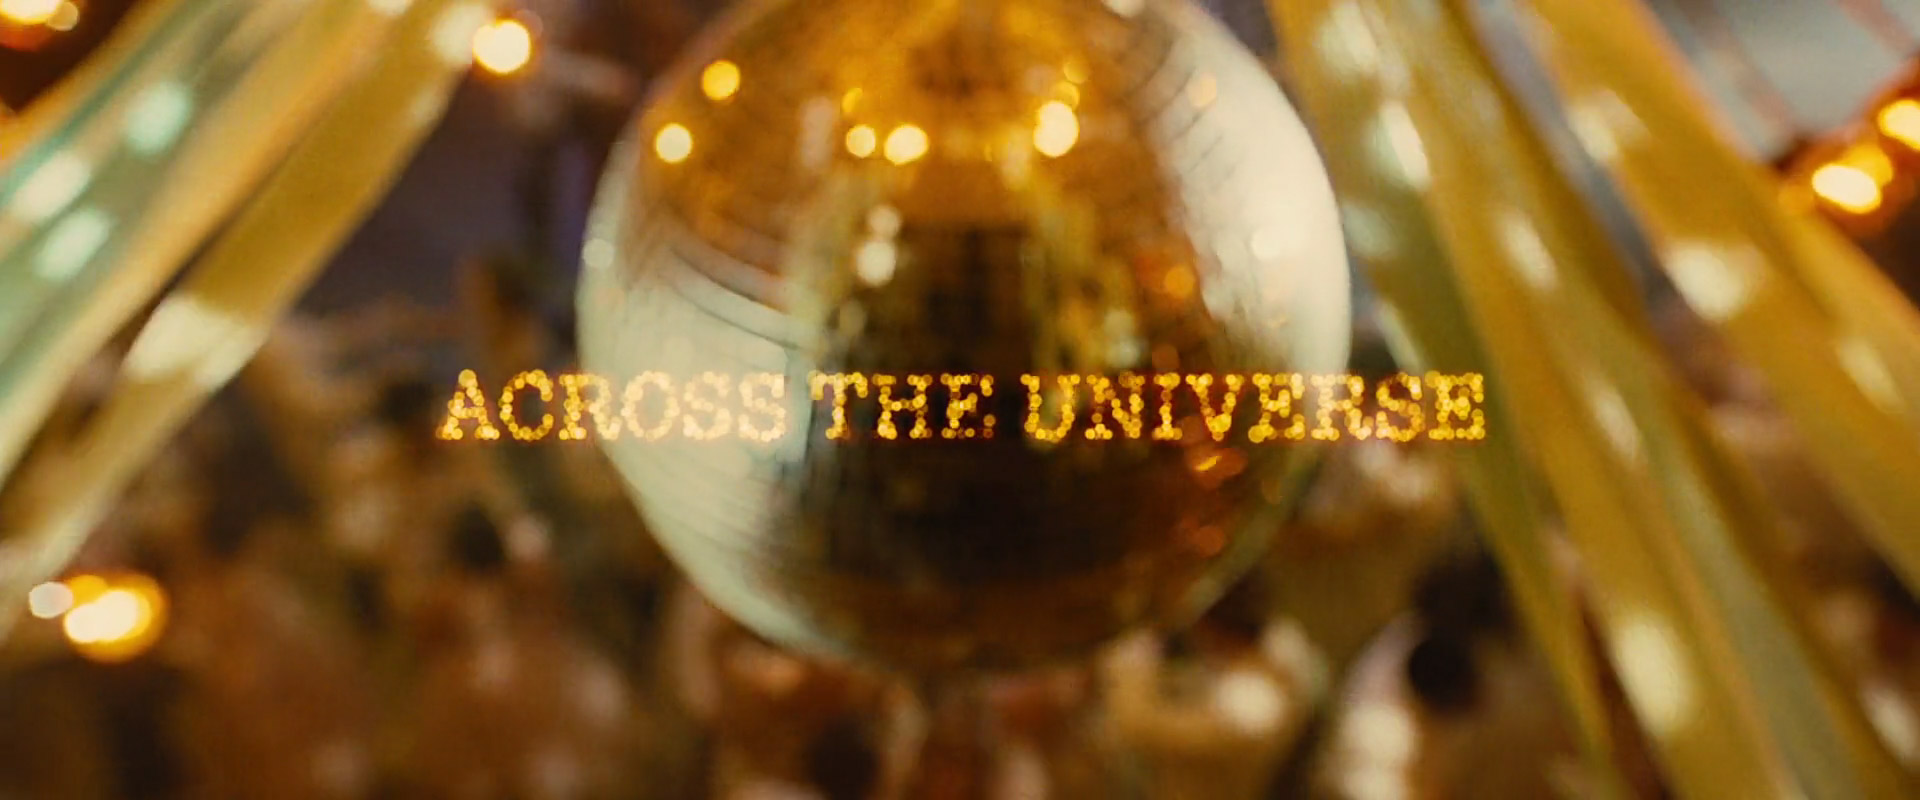 opening title in Across the Universe